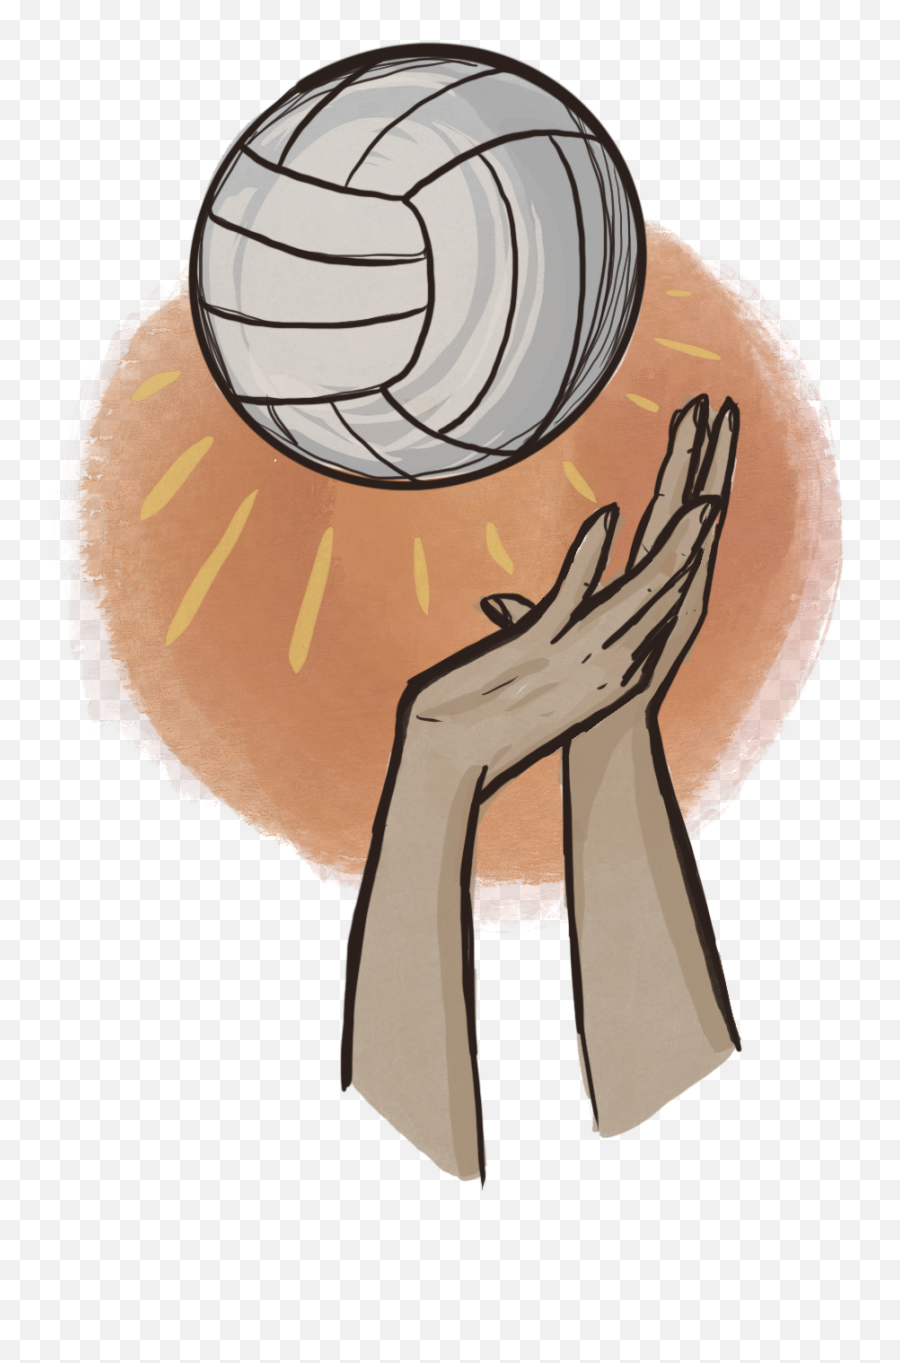 Volleyball With Coach Nicole Welch - For Volleyball Emoji,Volleyball Png